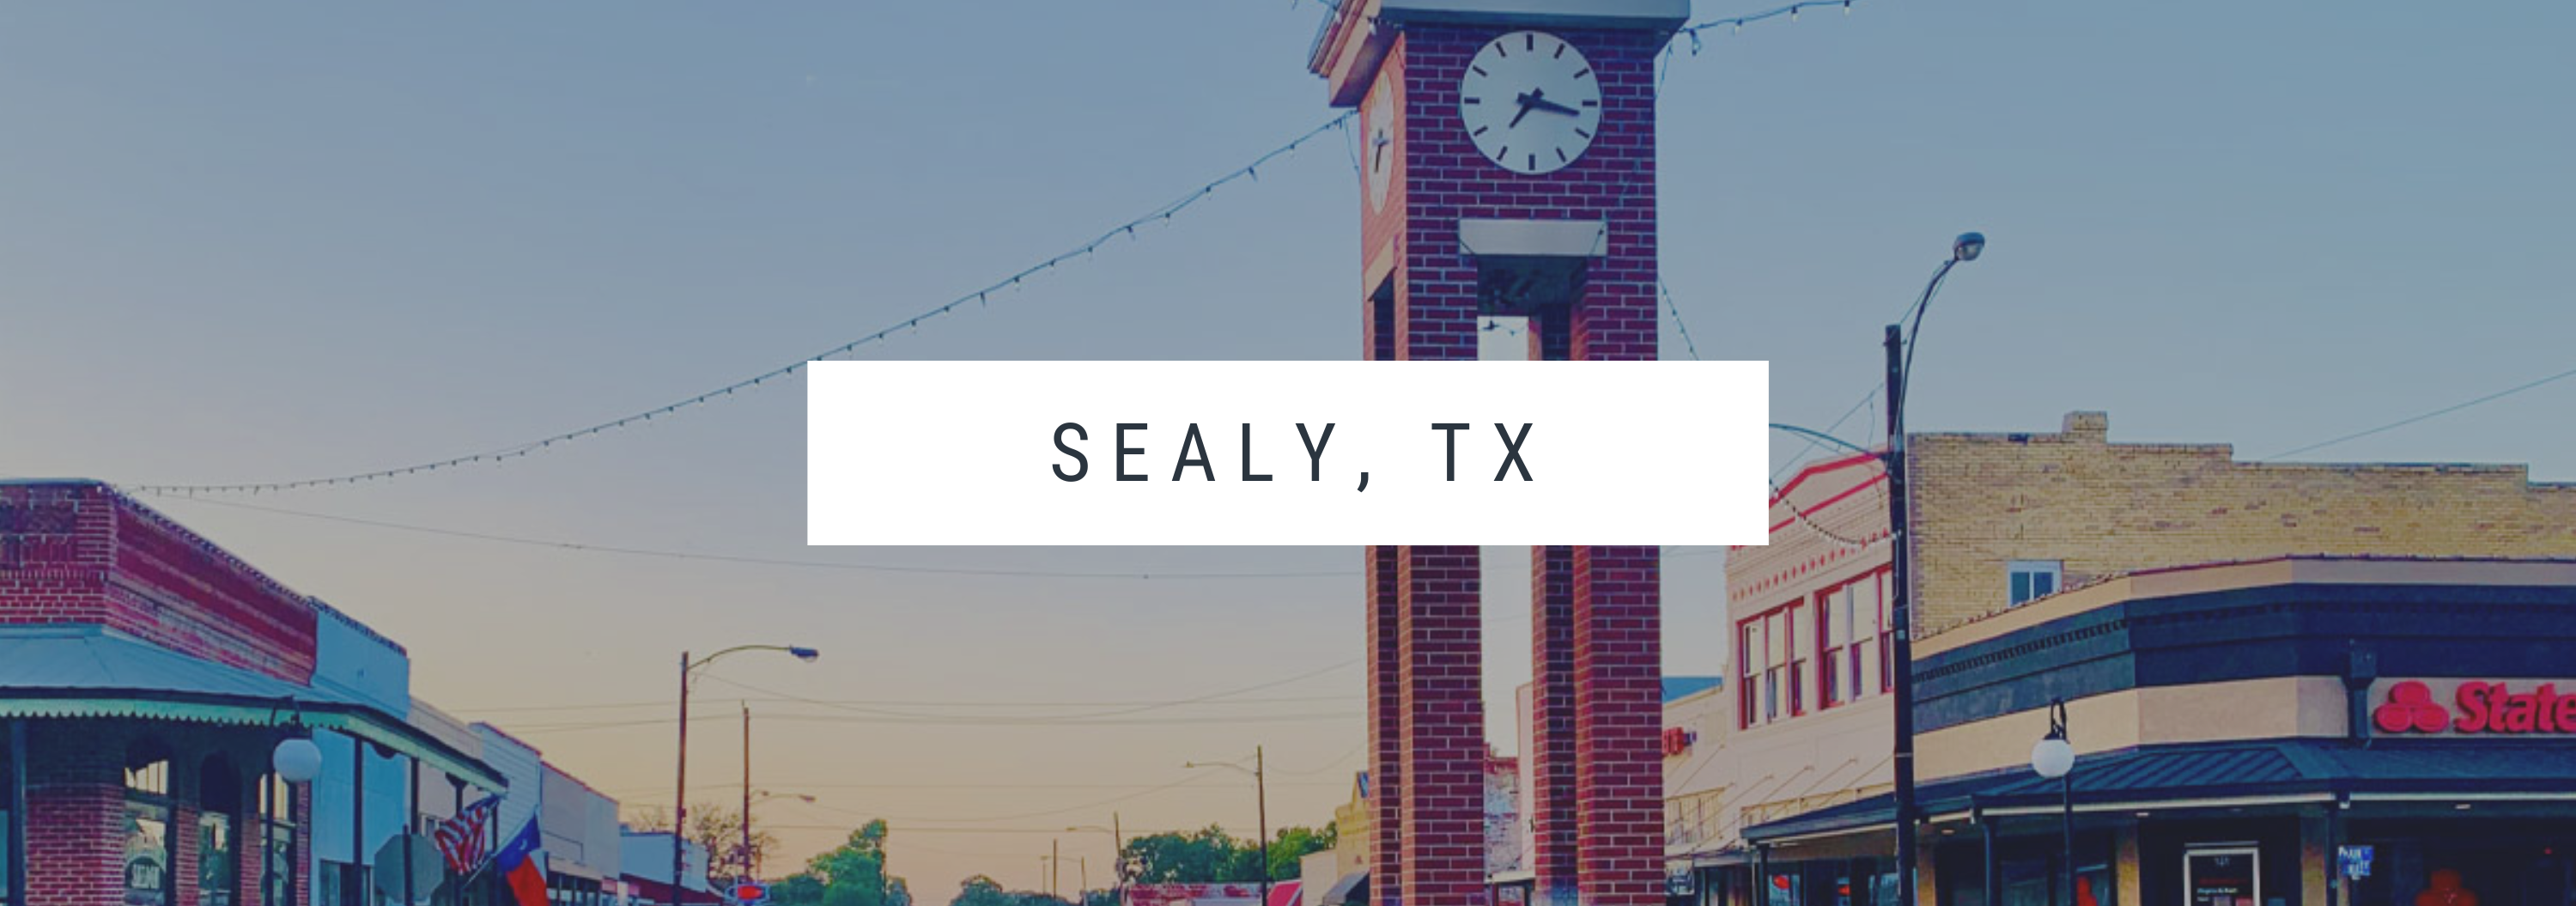 Local-Roofing-Contractor-in-Sealy-TX